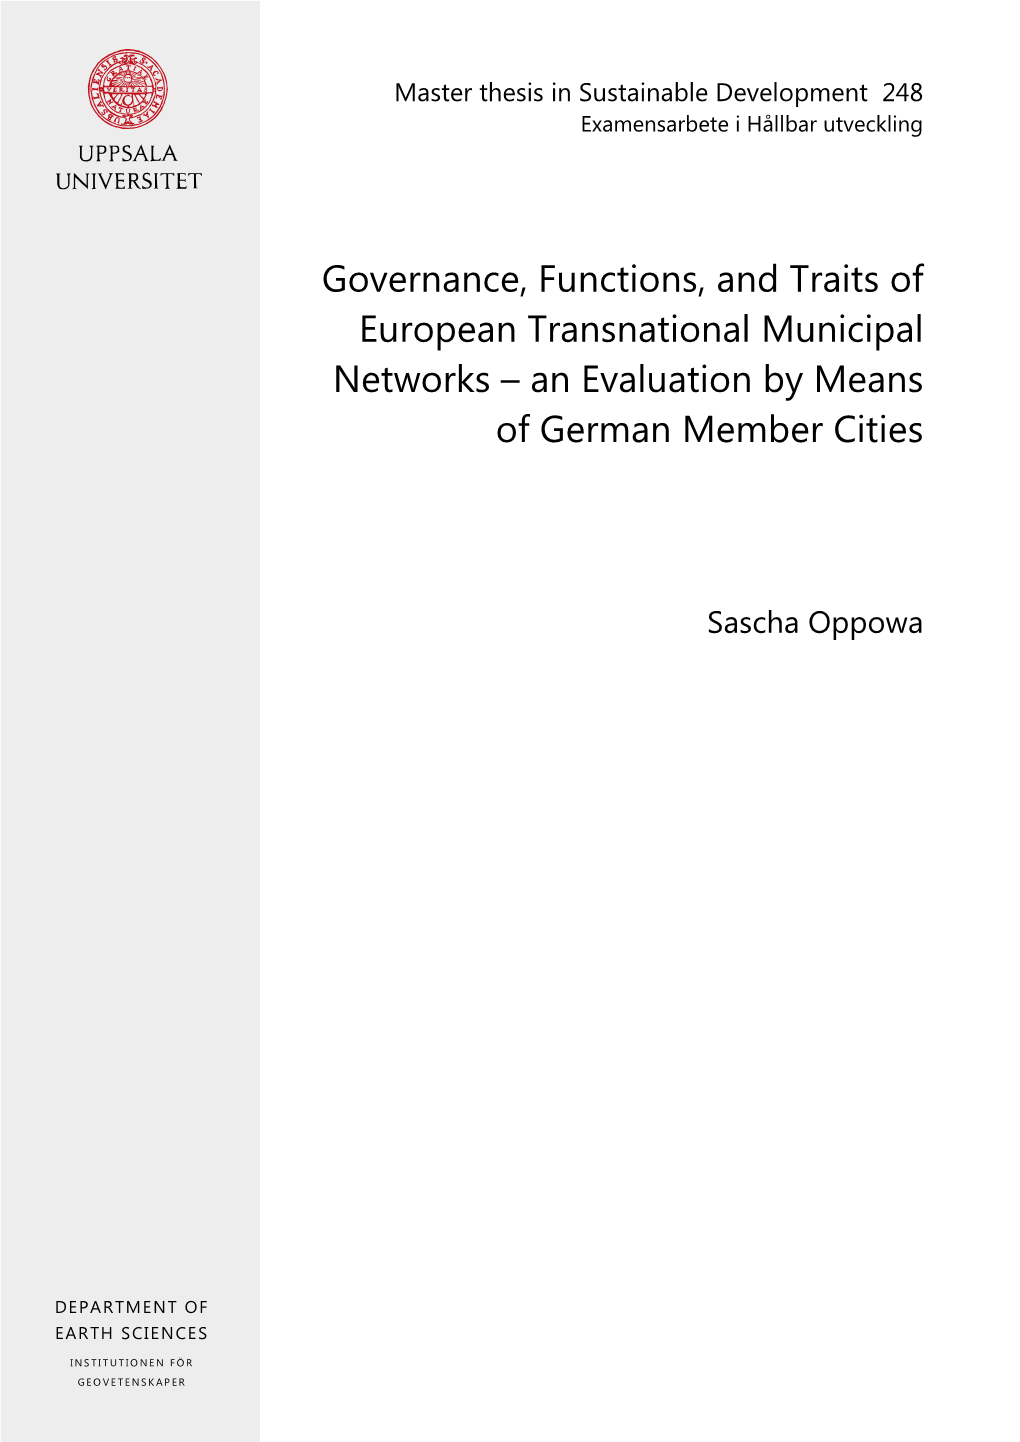 Governance, Functions, and Traits of European Transnational Municipal Networks – an Evaluation by Means of German Member Cities